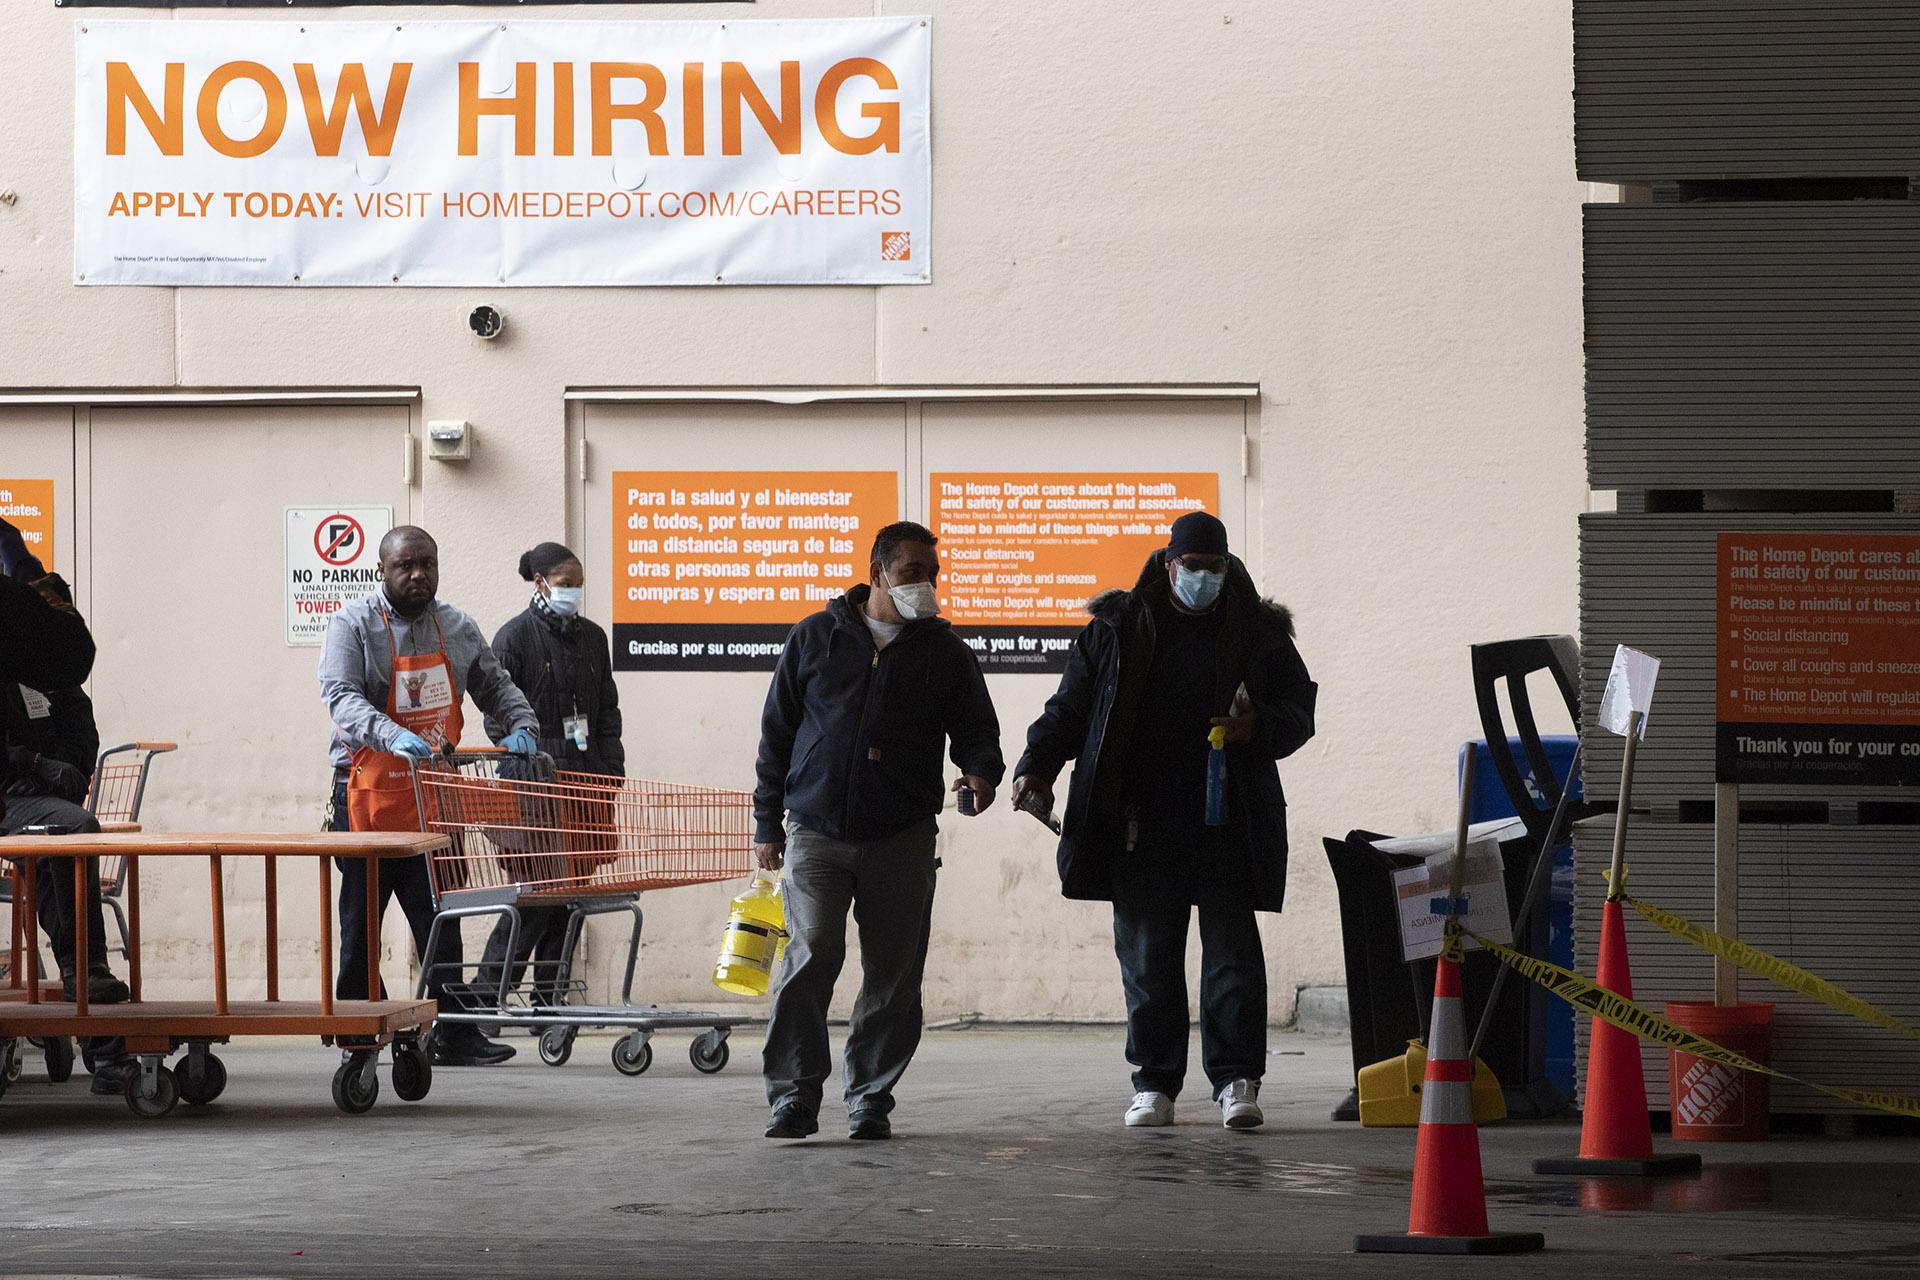 Home Depot customers carry their purchases as they leave the store, Friday, April 3, 2020 during the coronavirus pandemic in New York. (AP Photo / Mark Lennihan)